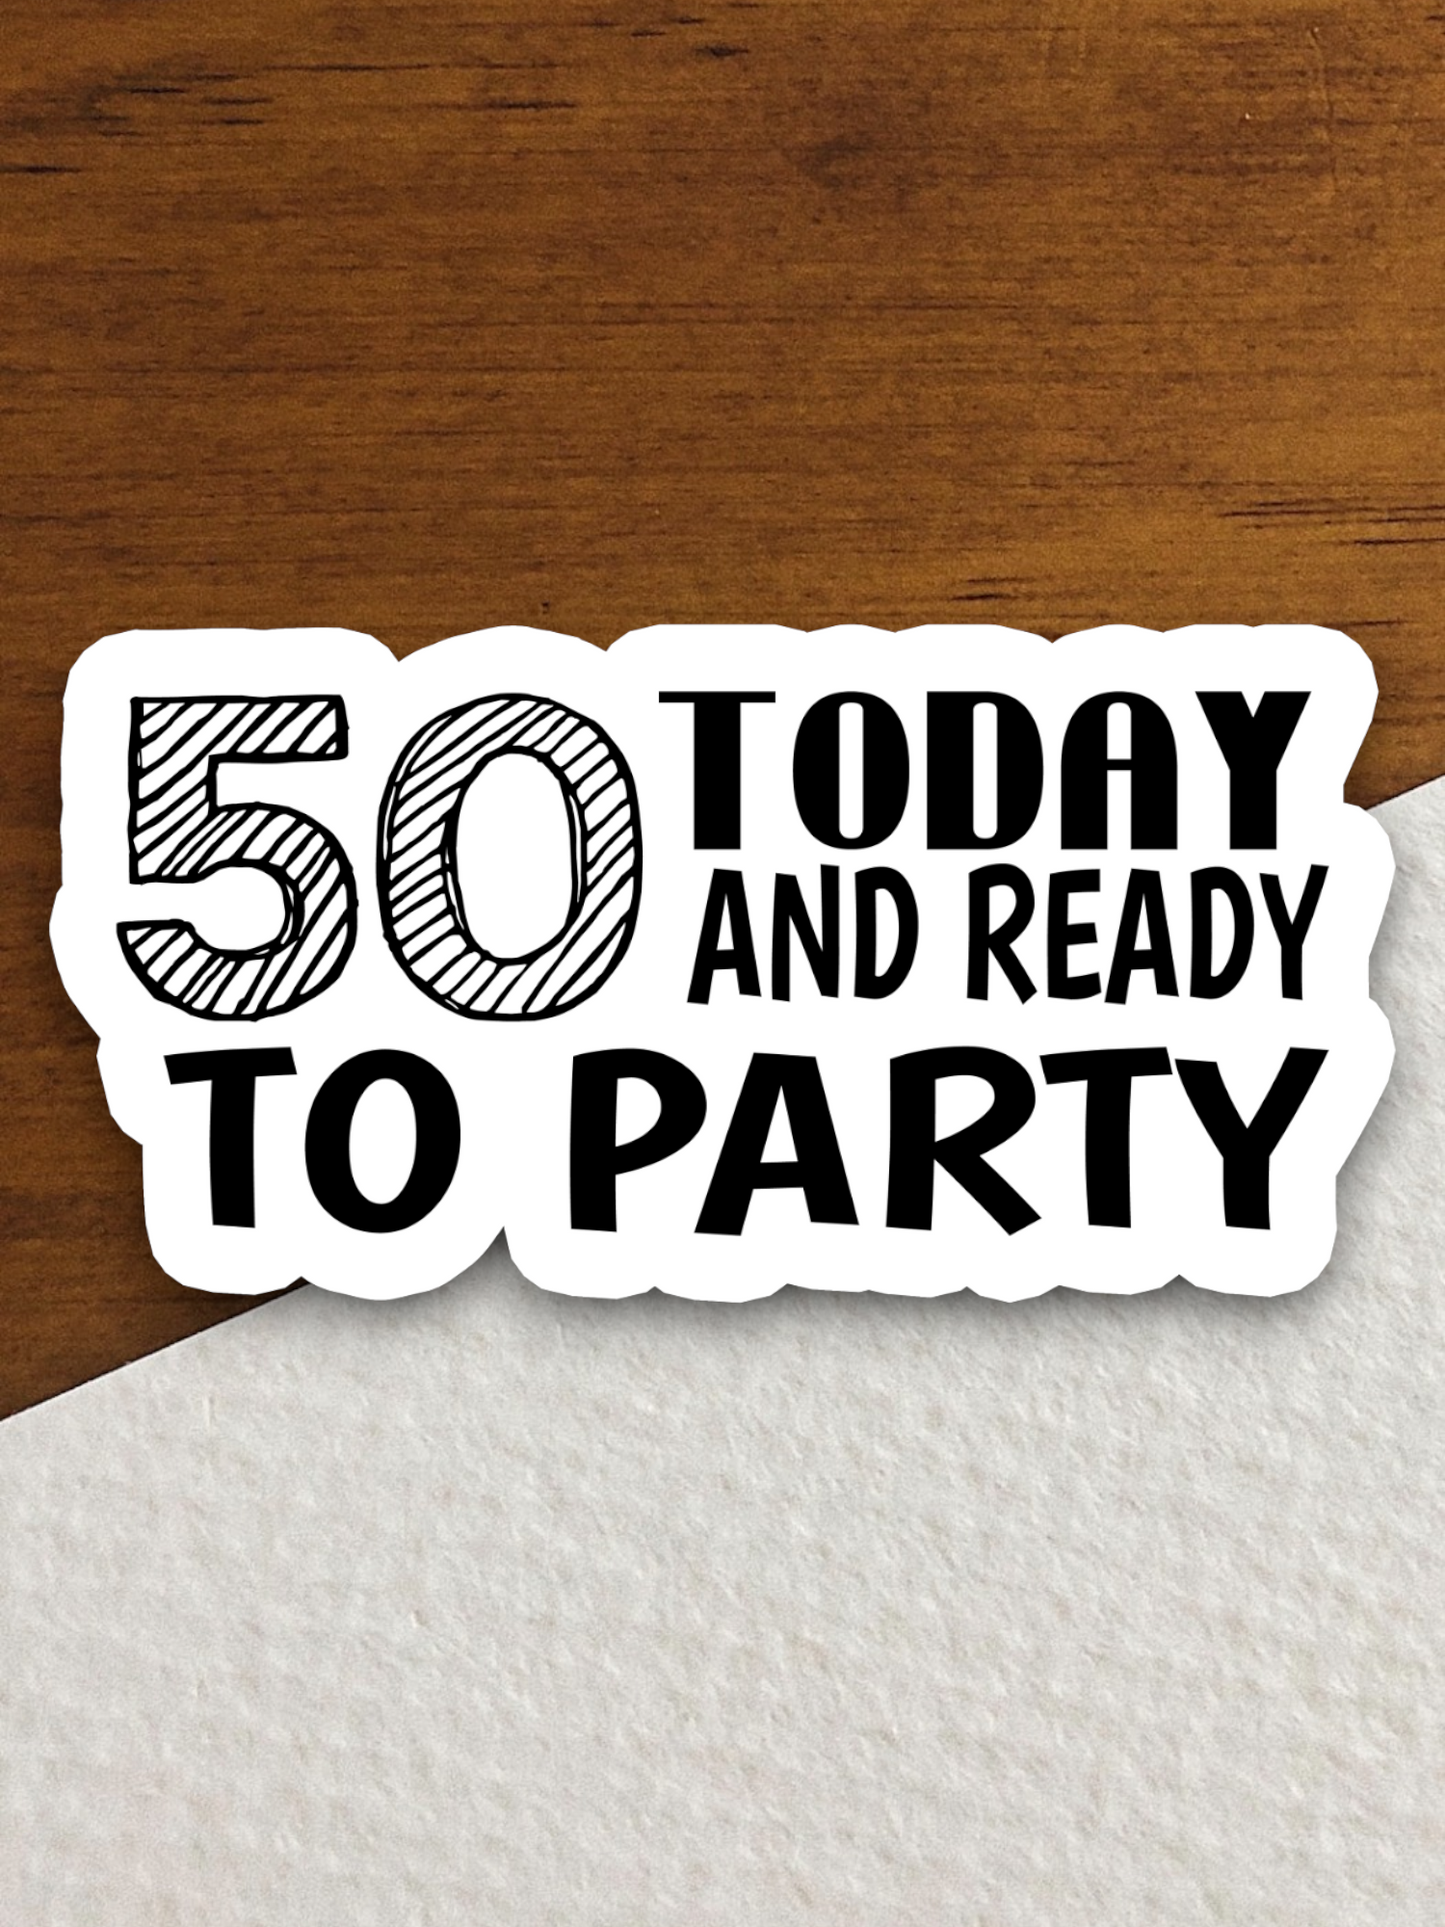 50 Today and Ready to Party Sticker